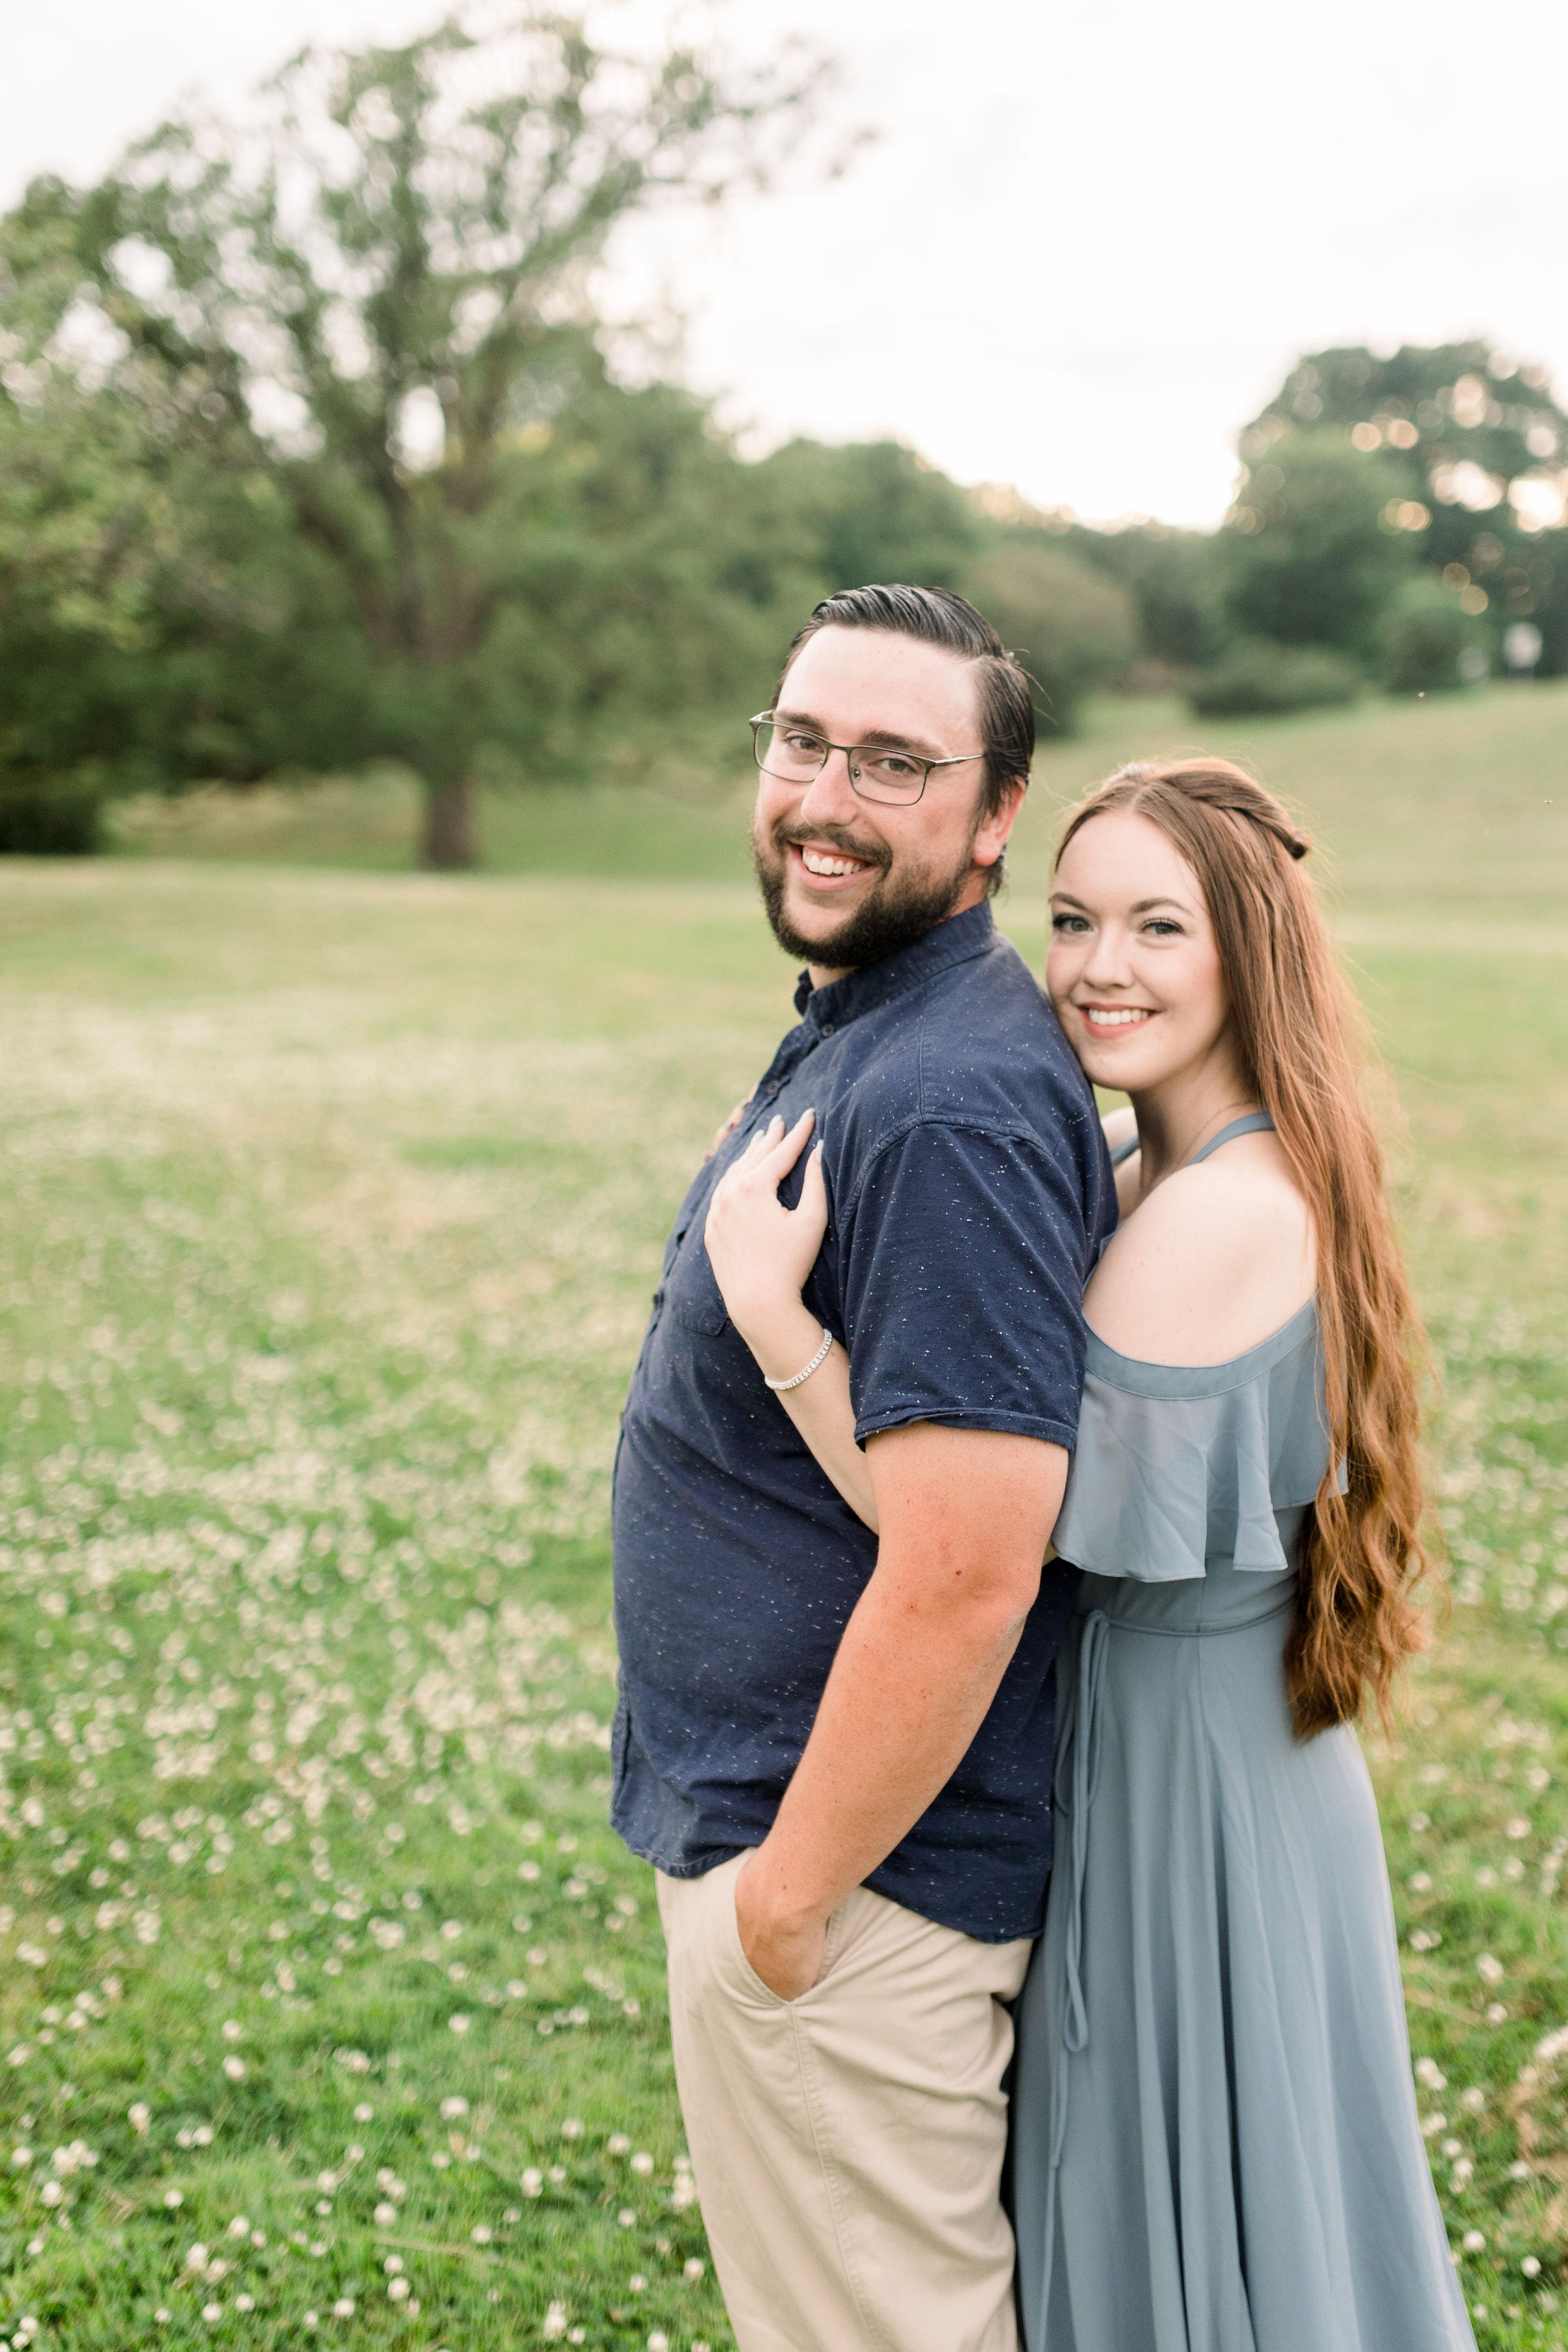  In a wildflower field in Ottawa, an engaged couple pose during a session with Chelsea Mason Photography. summer field portraits #chelseamasonphotography #chelseamasonengagements #Ottawaengagements #DominonArboretum #Ottawaphotographers&nbsp; 